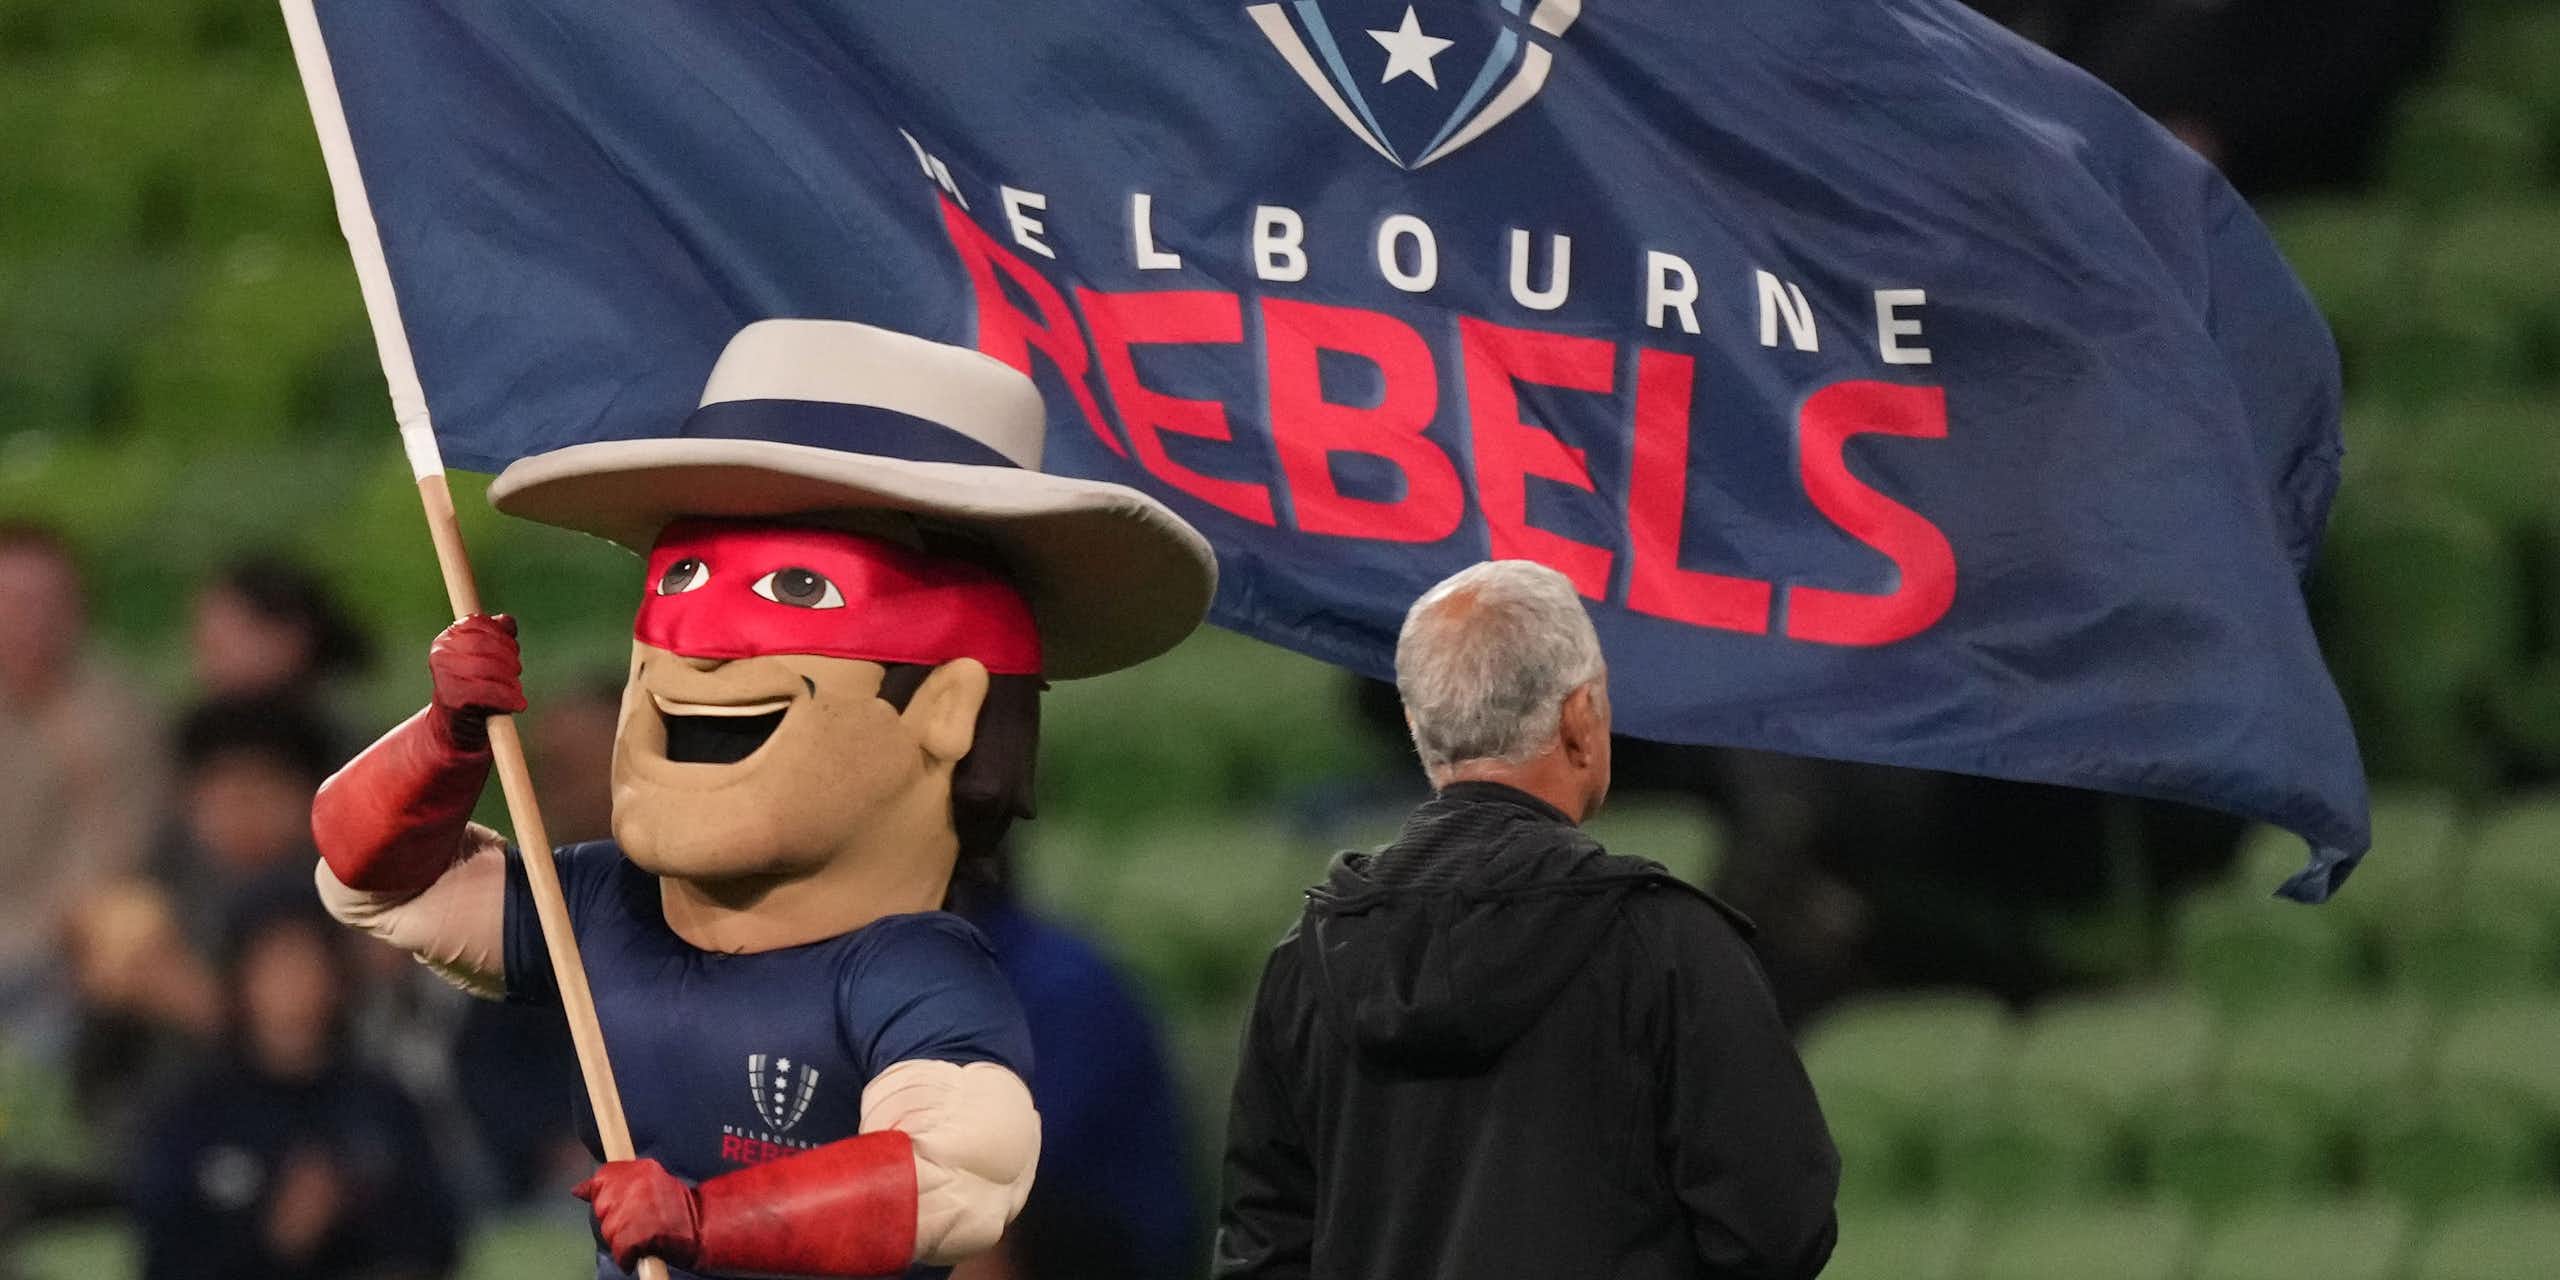 The Melbourne Rebels mascot waves the club flag during a game